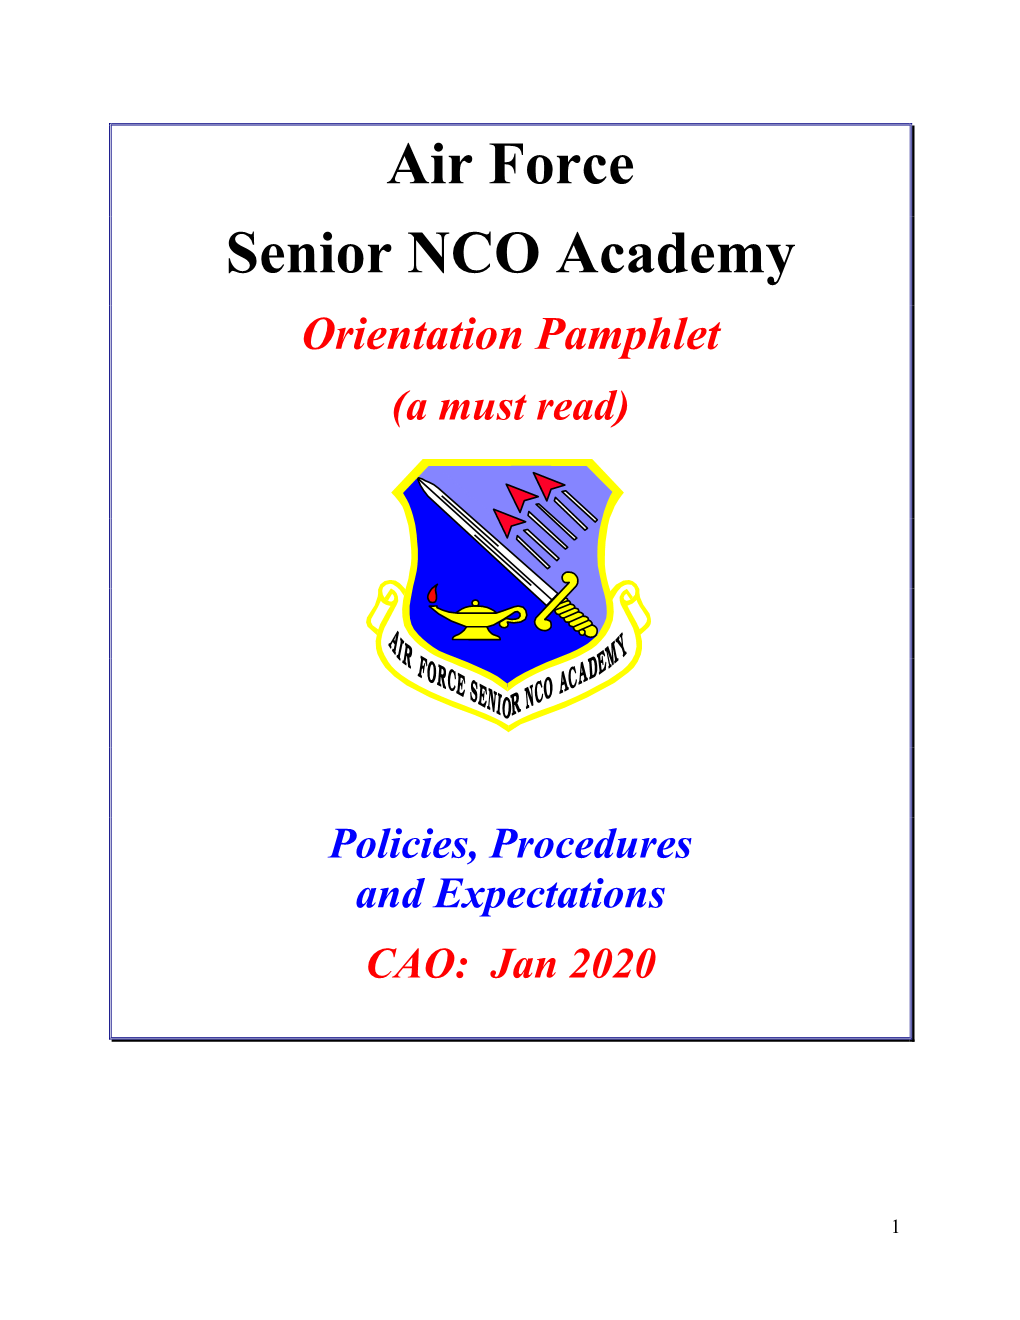 Air Force Senior NCO Academy Orientation Pamphlet (A Must Read)